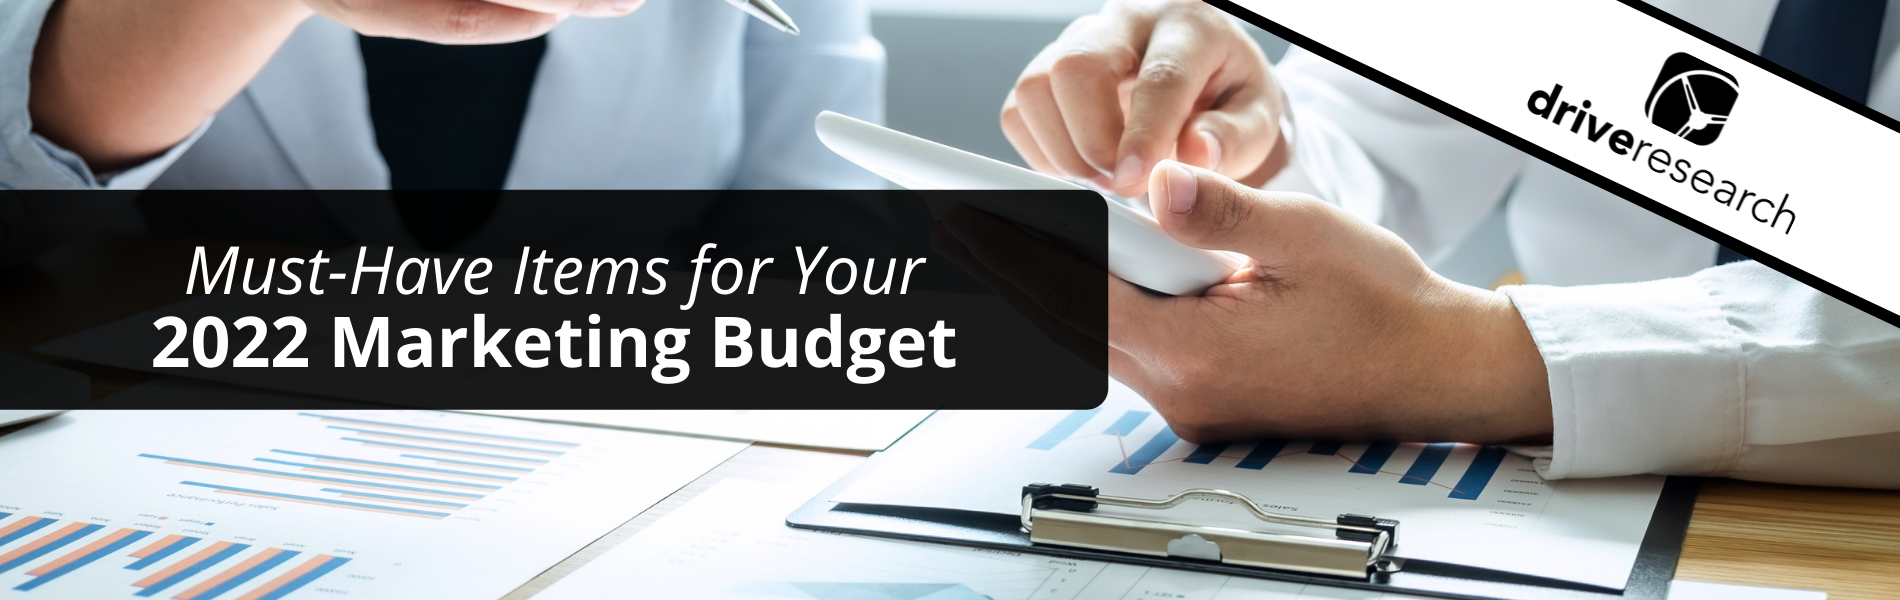 must have items for your 2022 marketing budget